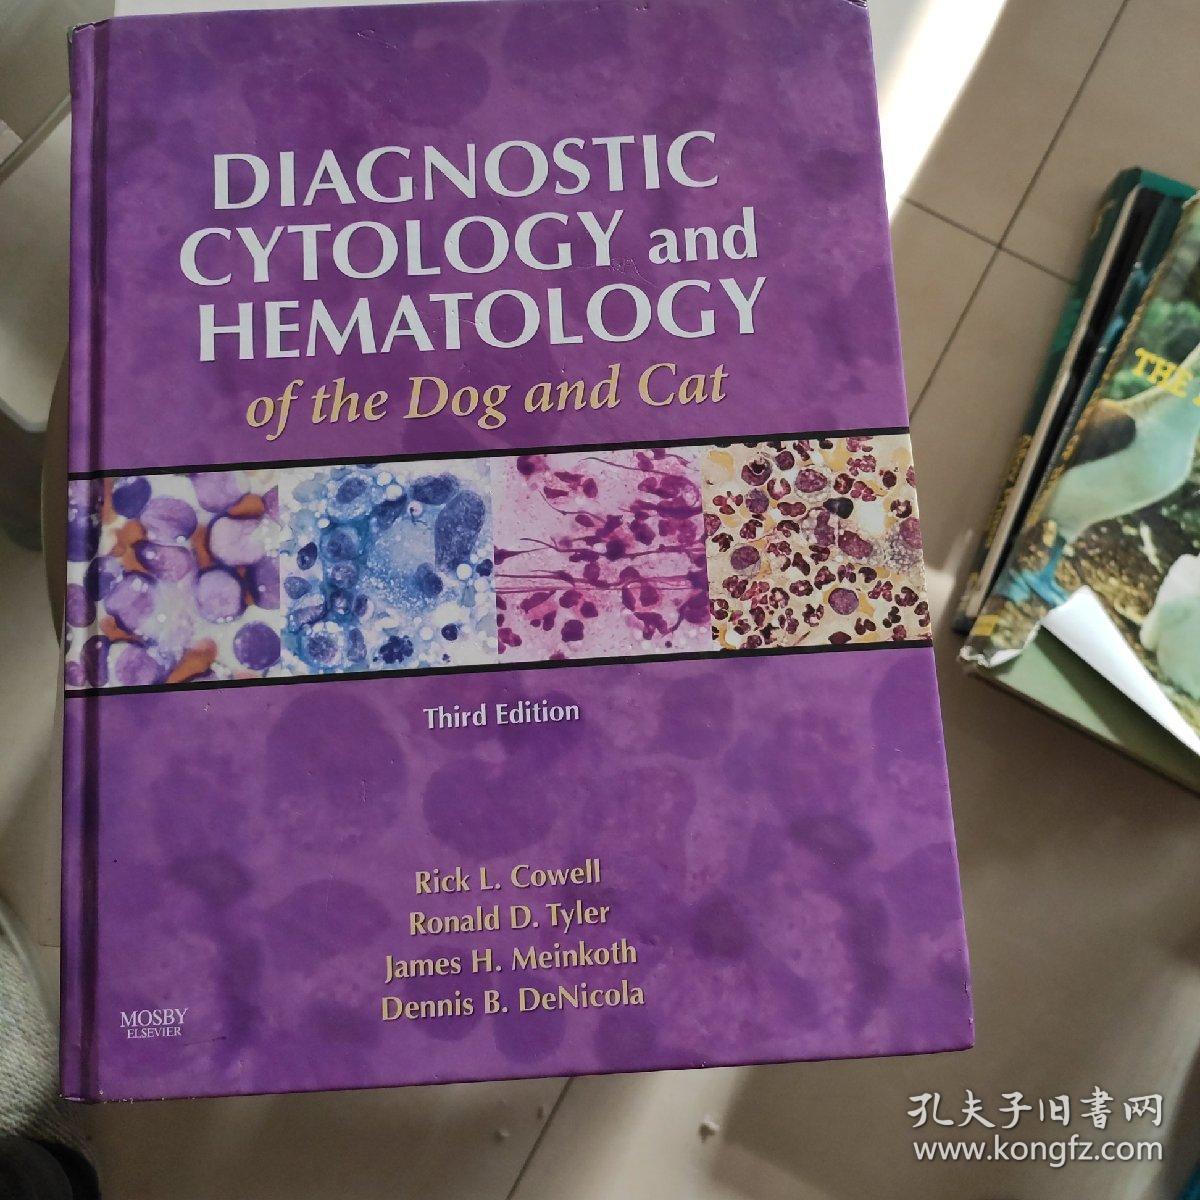 Diagnostic Cytology And Hematology Of The Dog And Cat狗和猫细胞学及血液学诊断 孔夫子旧书网